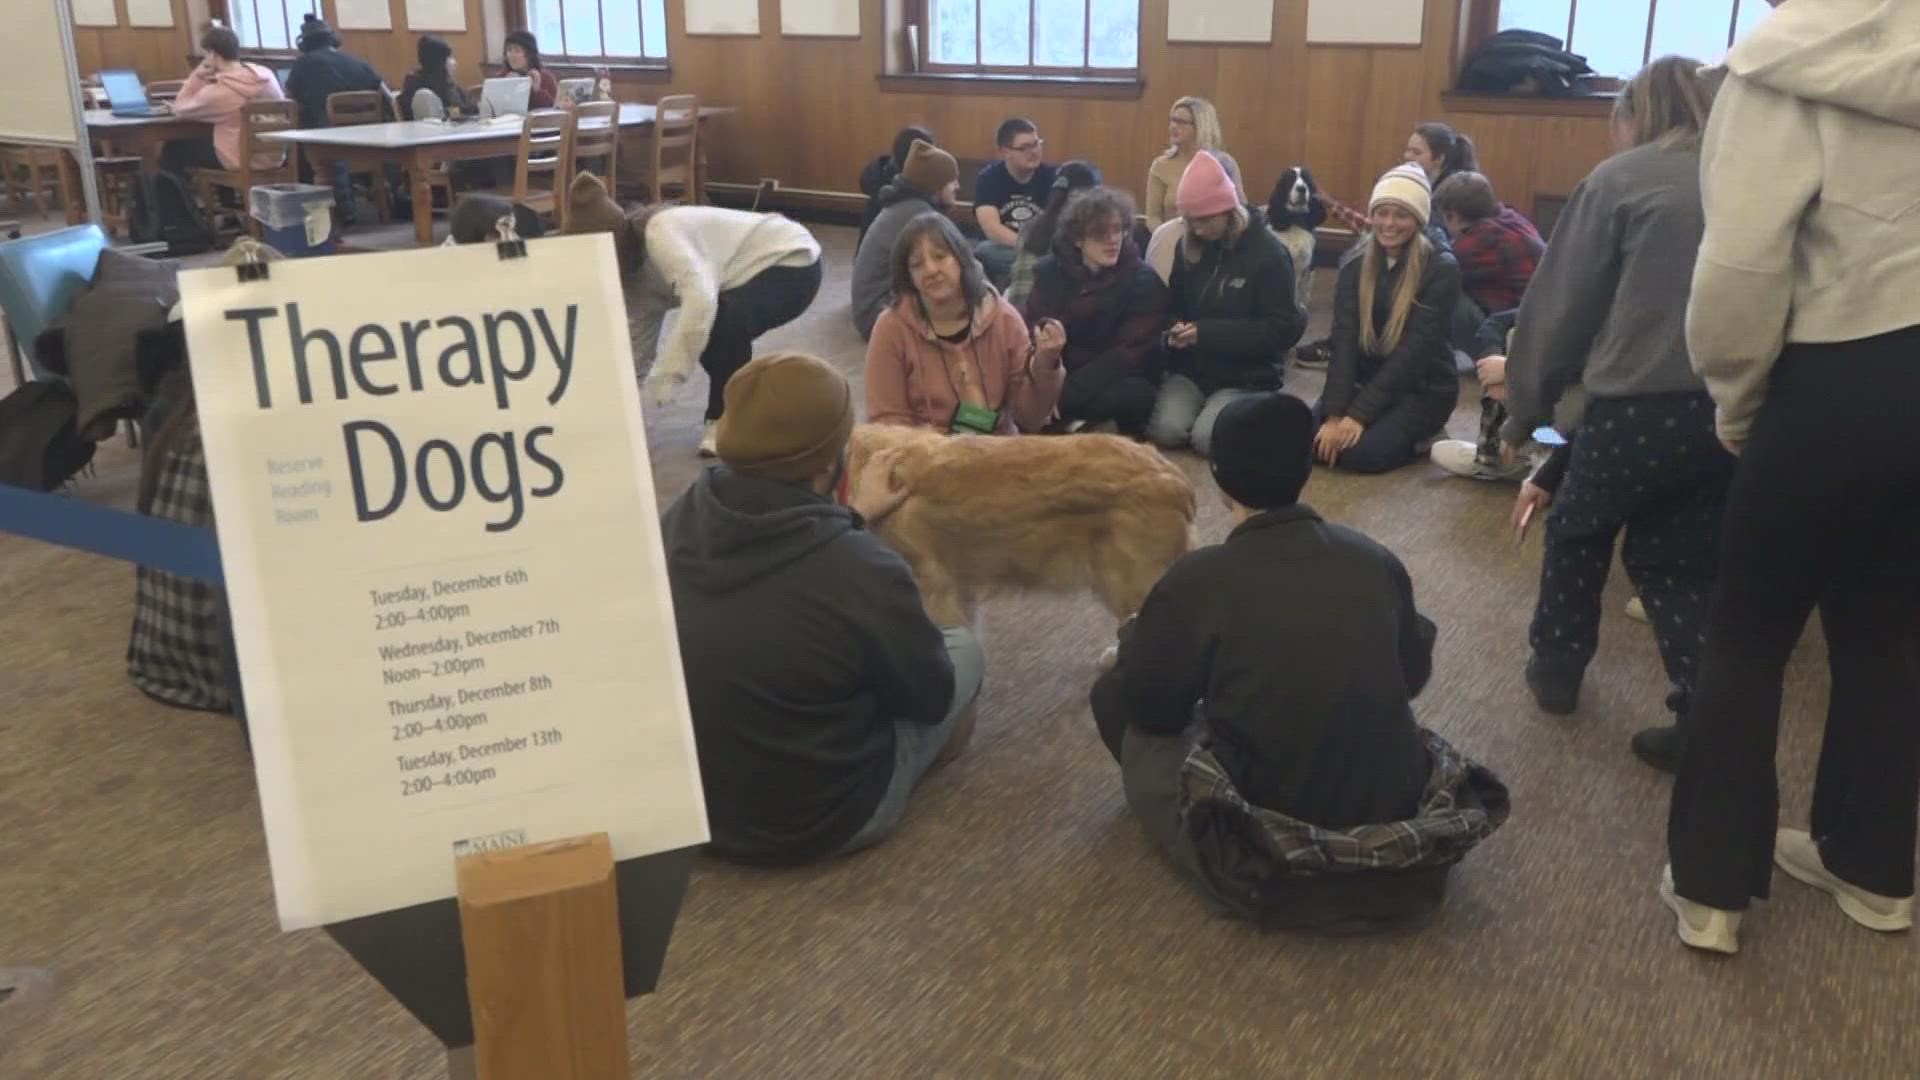 The University of Maine welcomed a few therapy dogs in the Fogler Library on Tuesday to help students de-stress after taking their final exams.